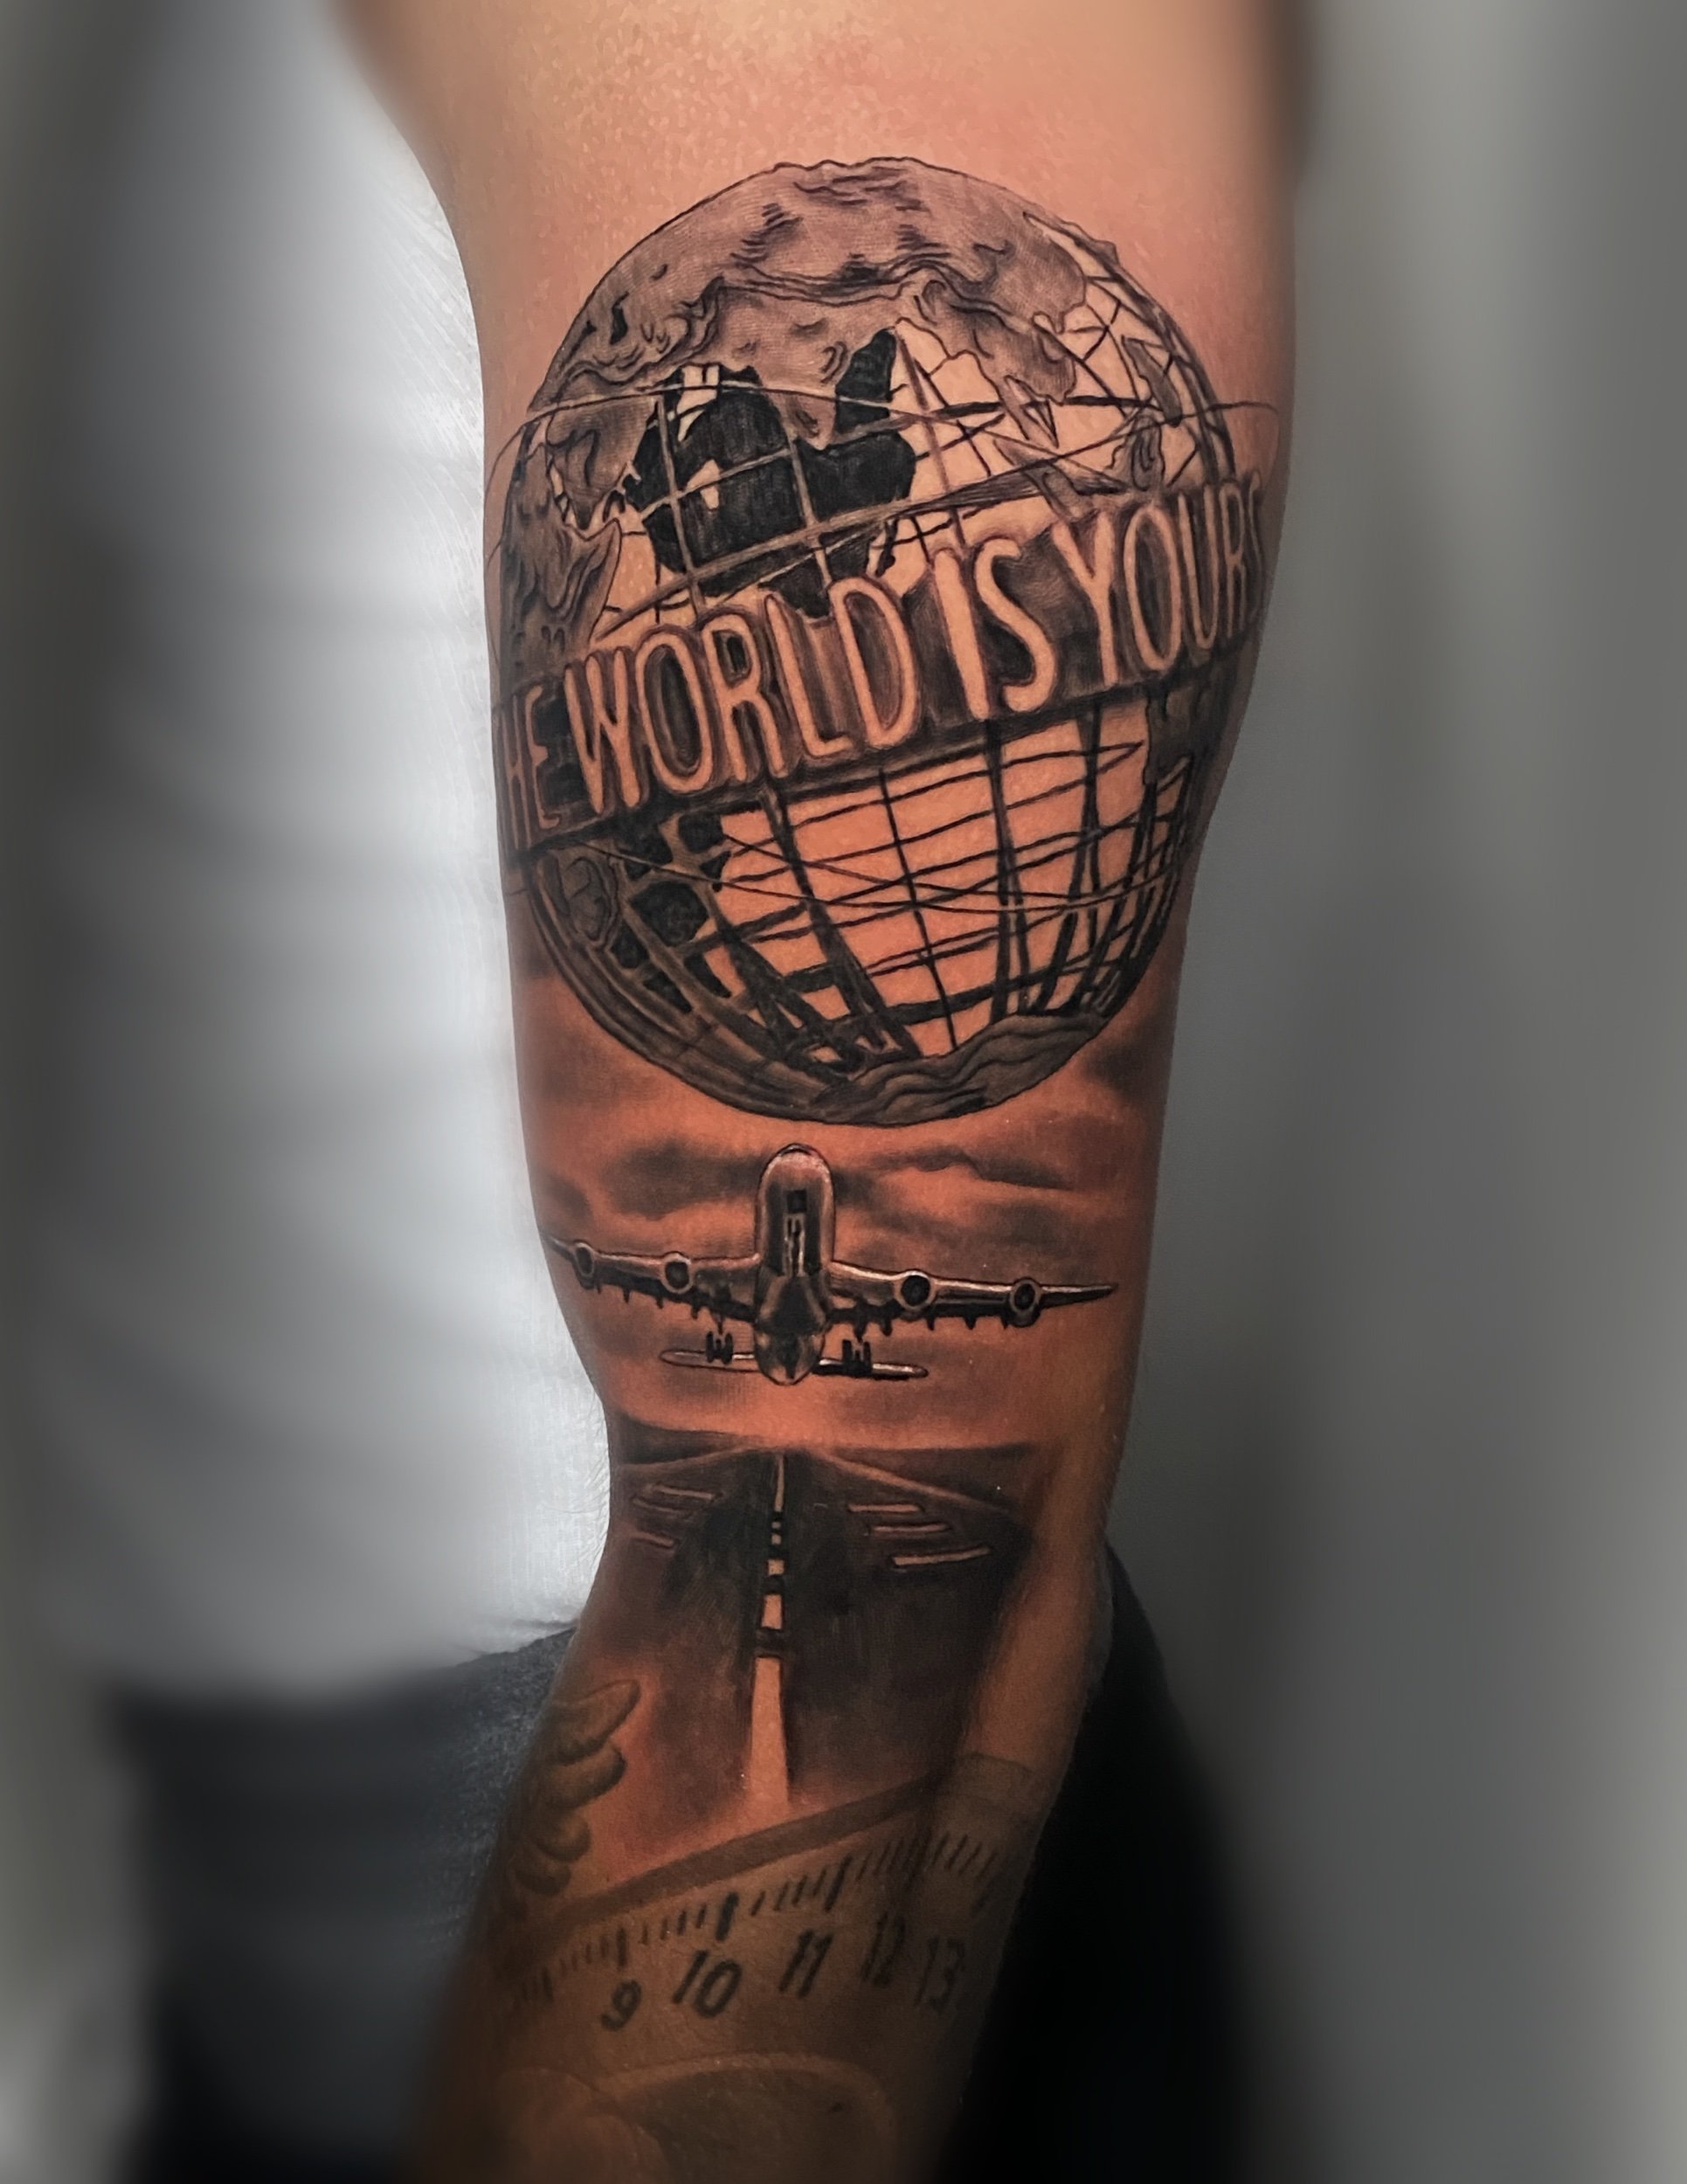 The world is yours by macktattoos  Instagram